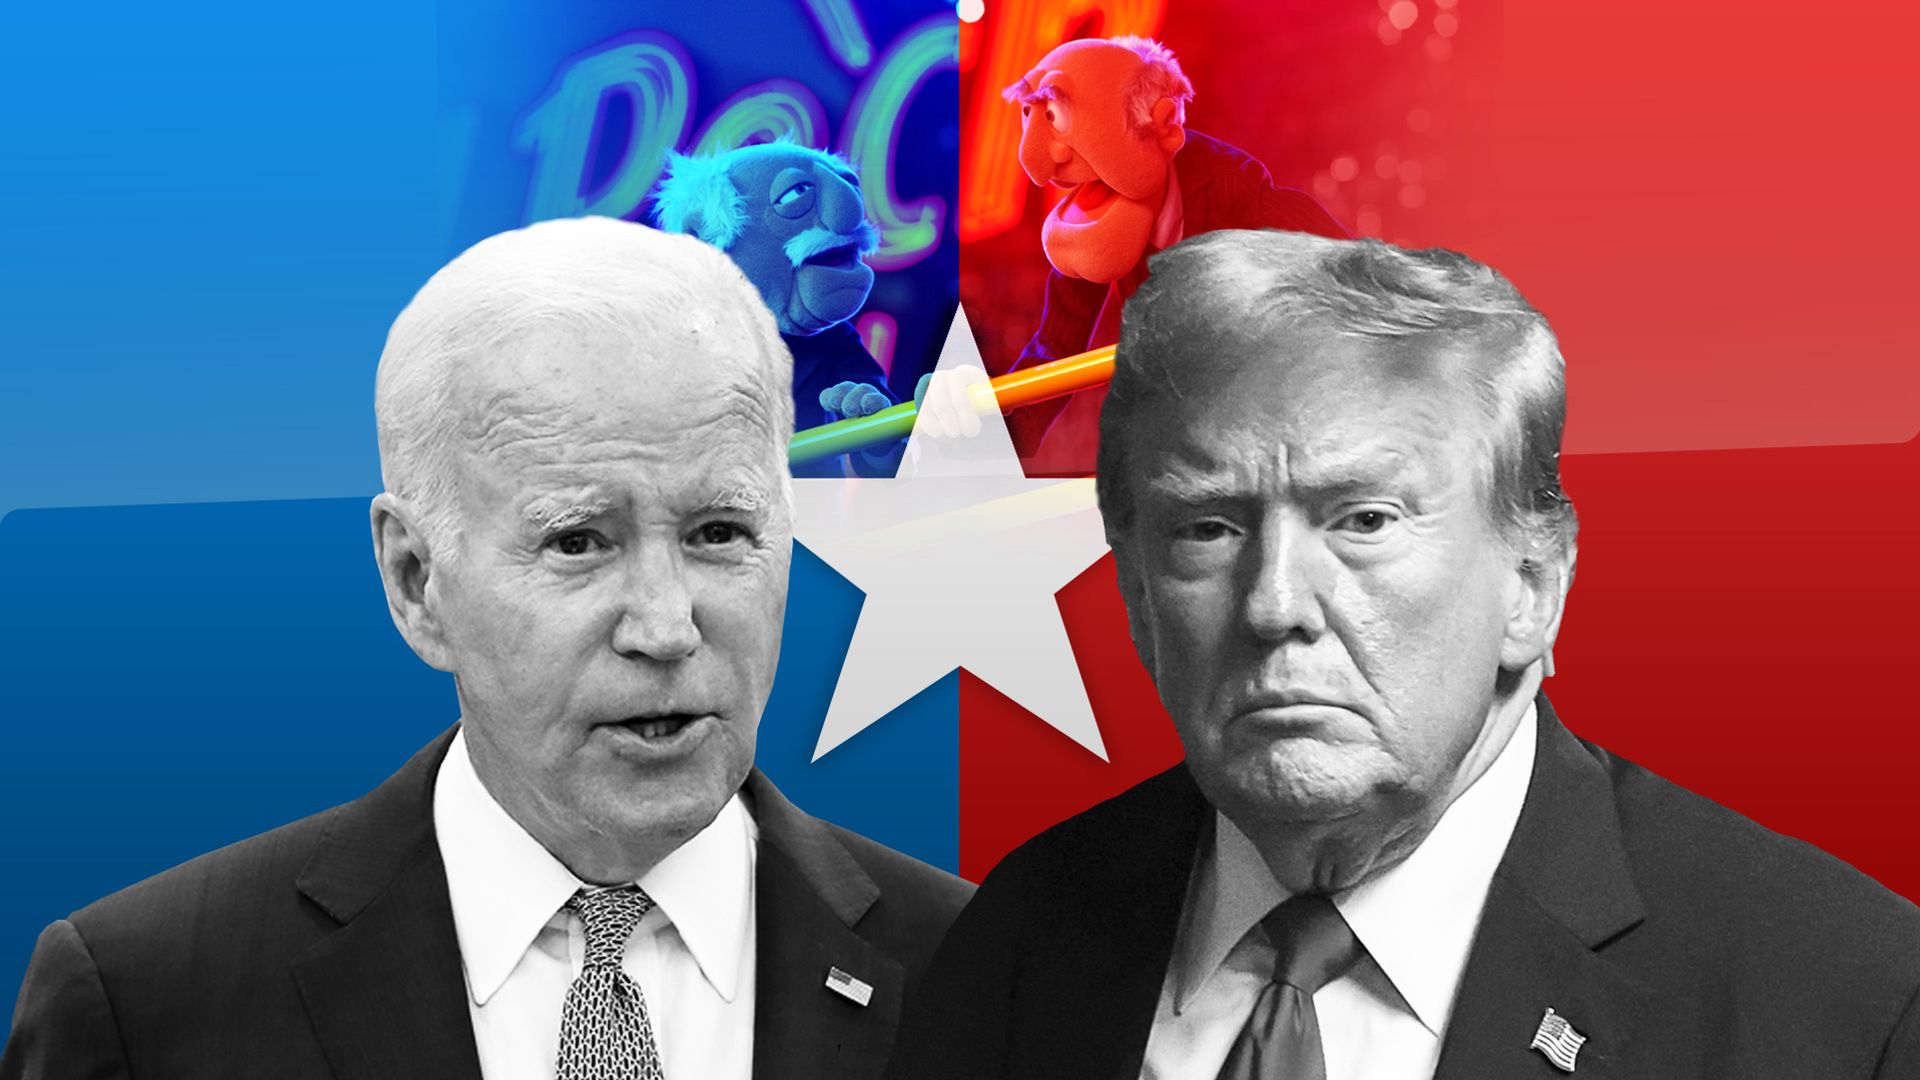 Bad sign for democracy that Biden and Trump debate compared to The Muppets | Adam Boulton